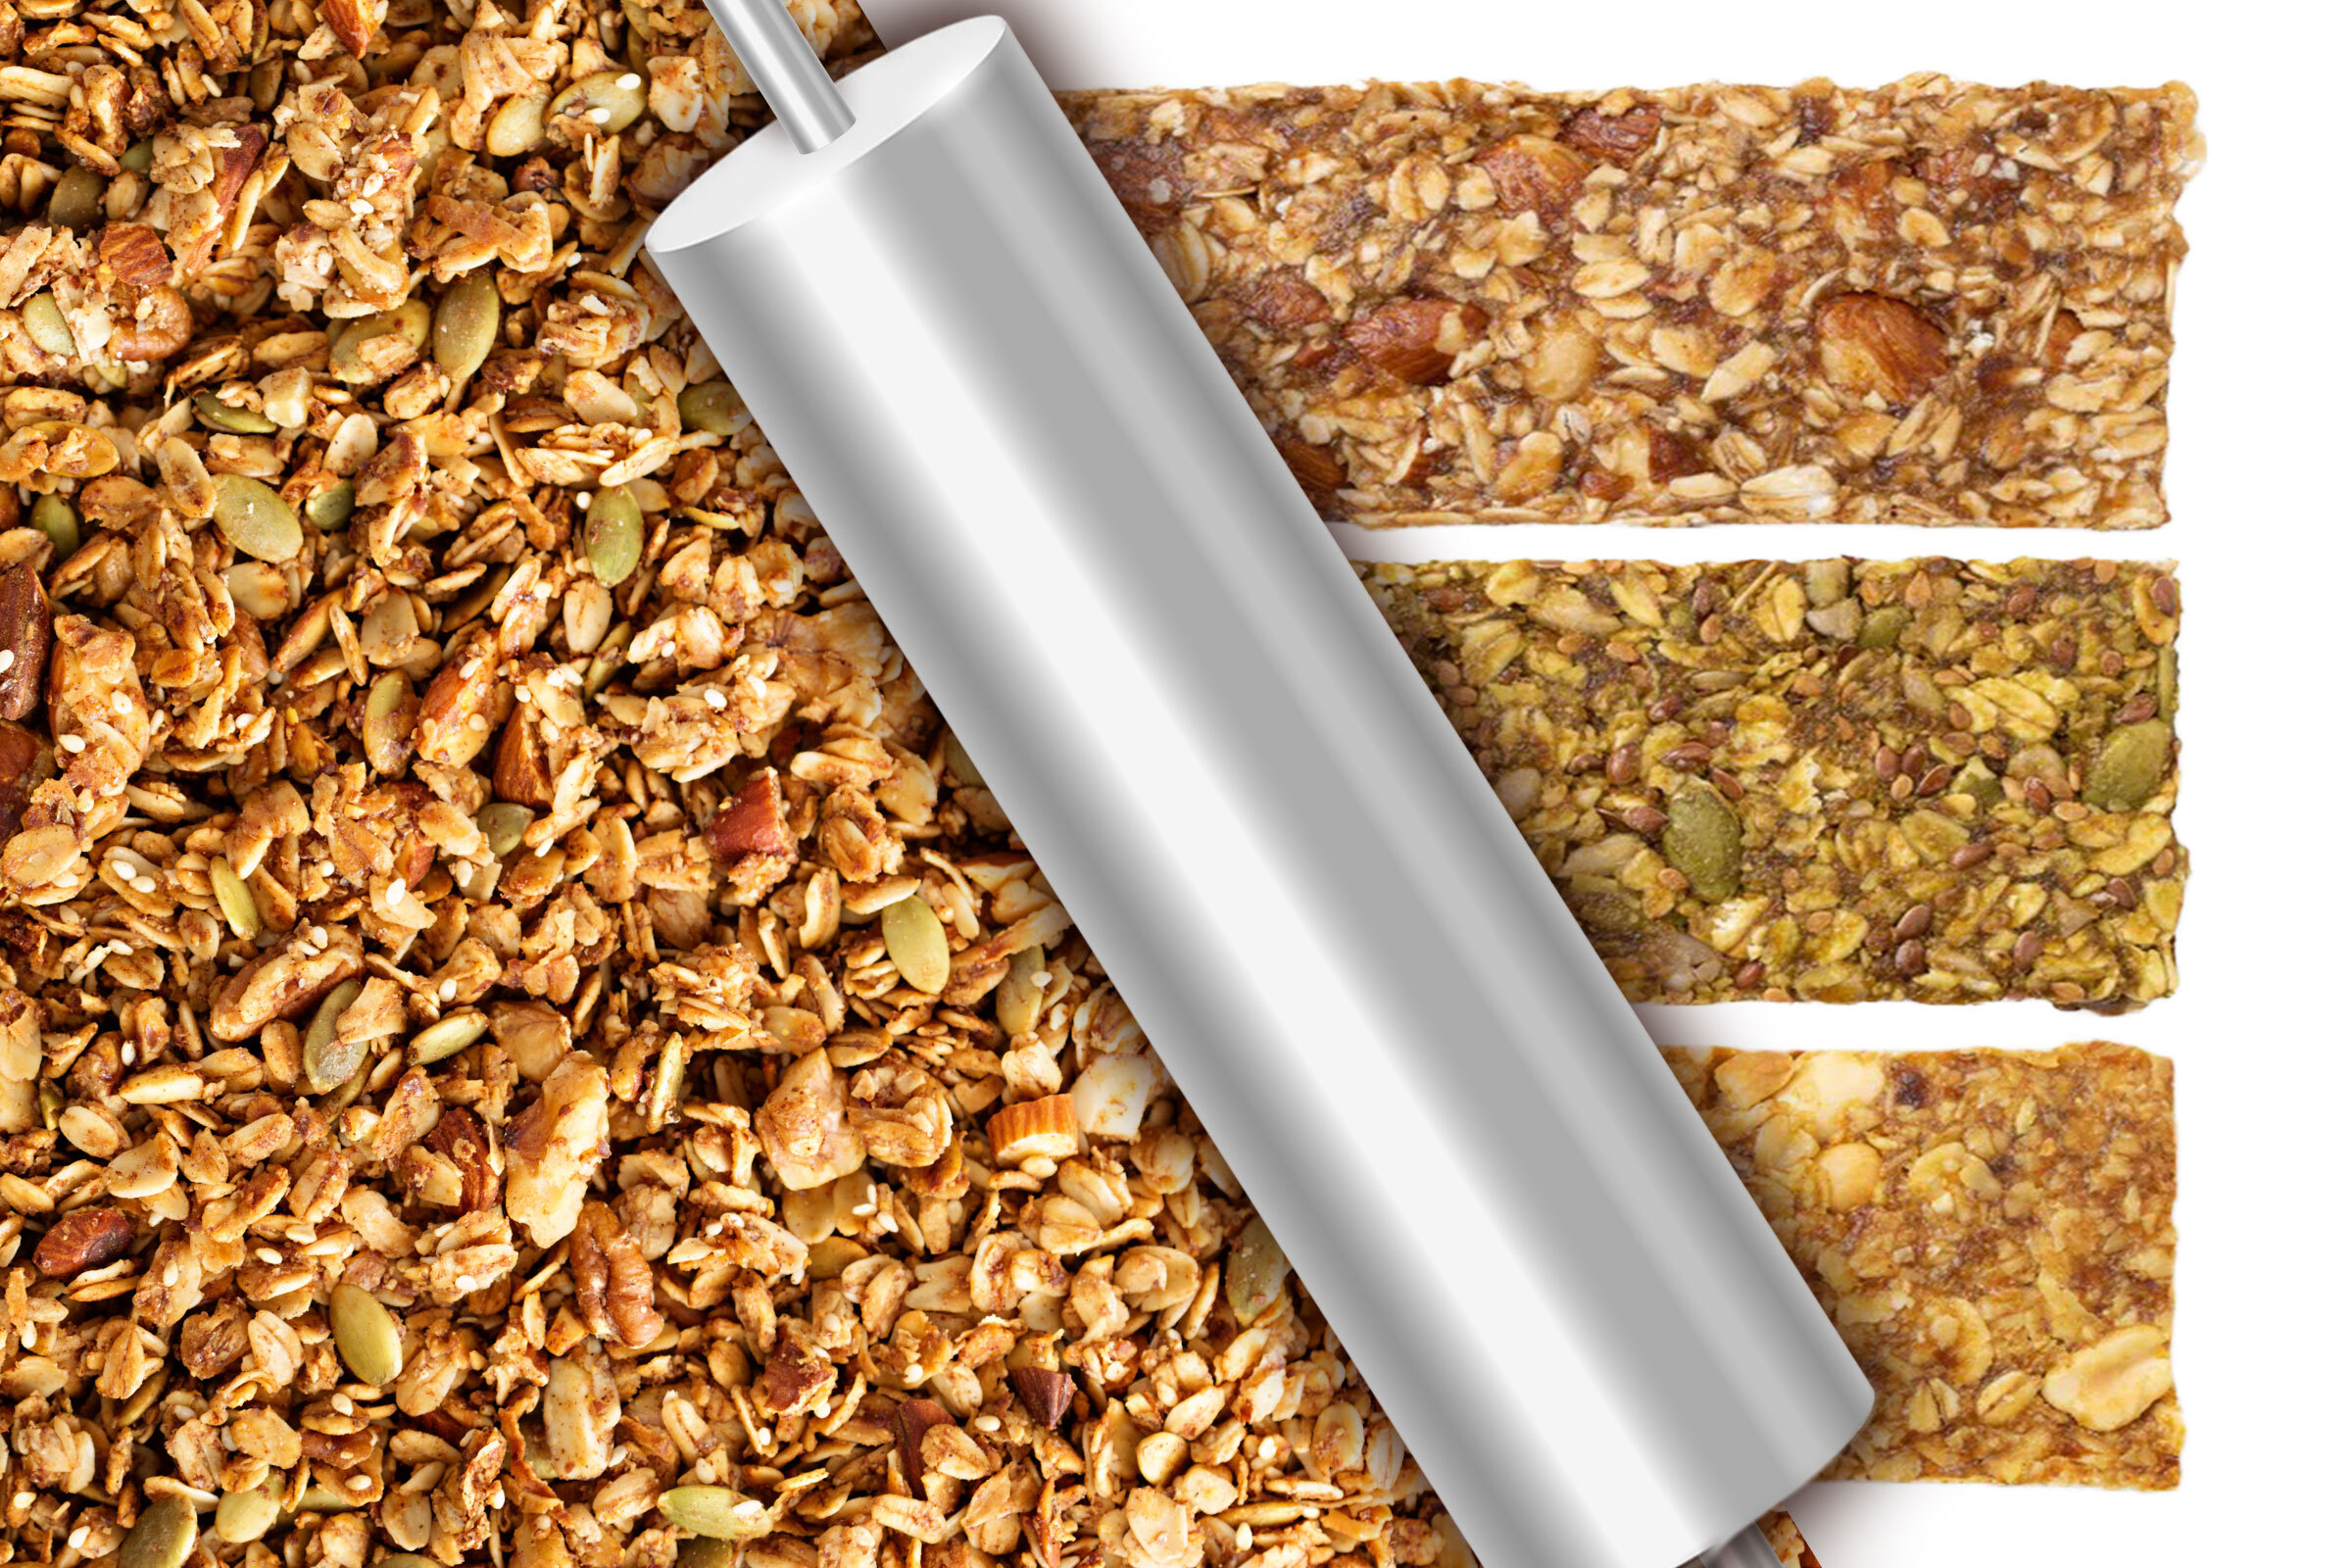 Illustrative image showing how press design supports manufacturing of granola bars.